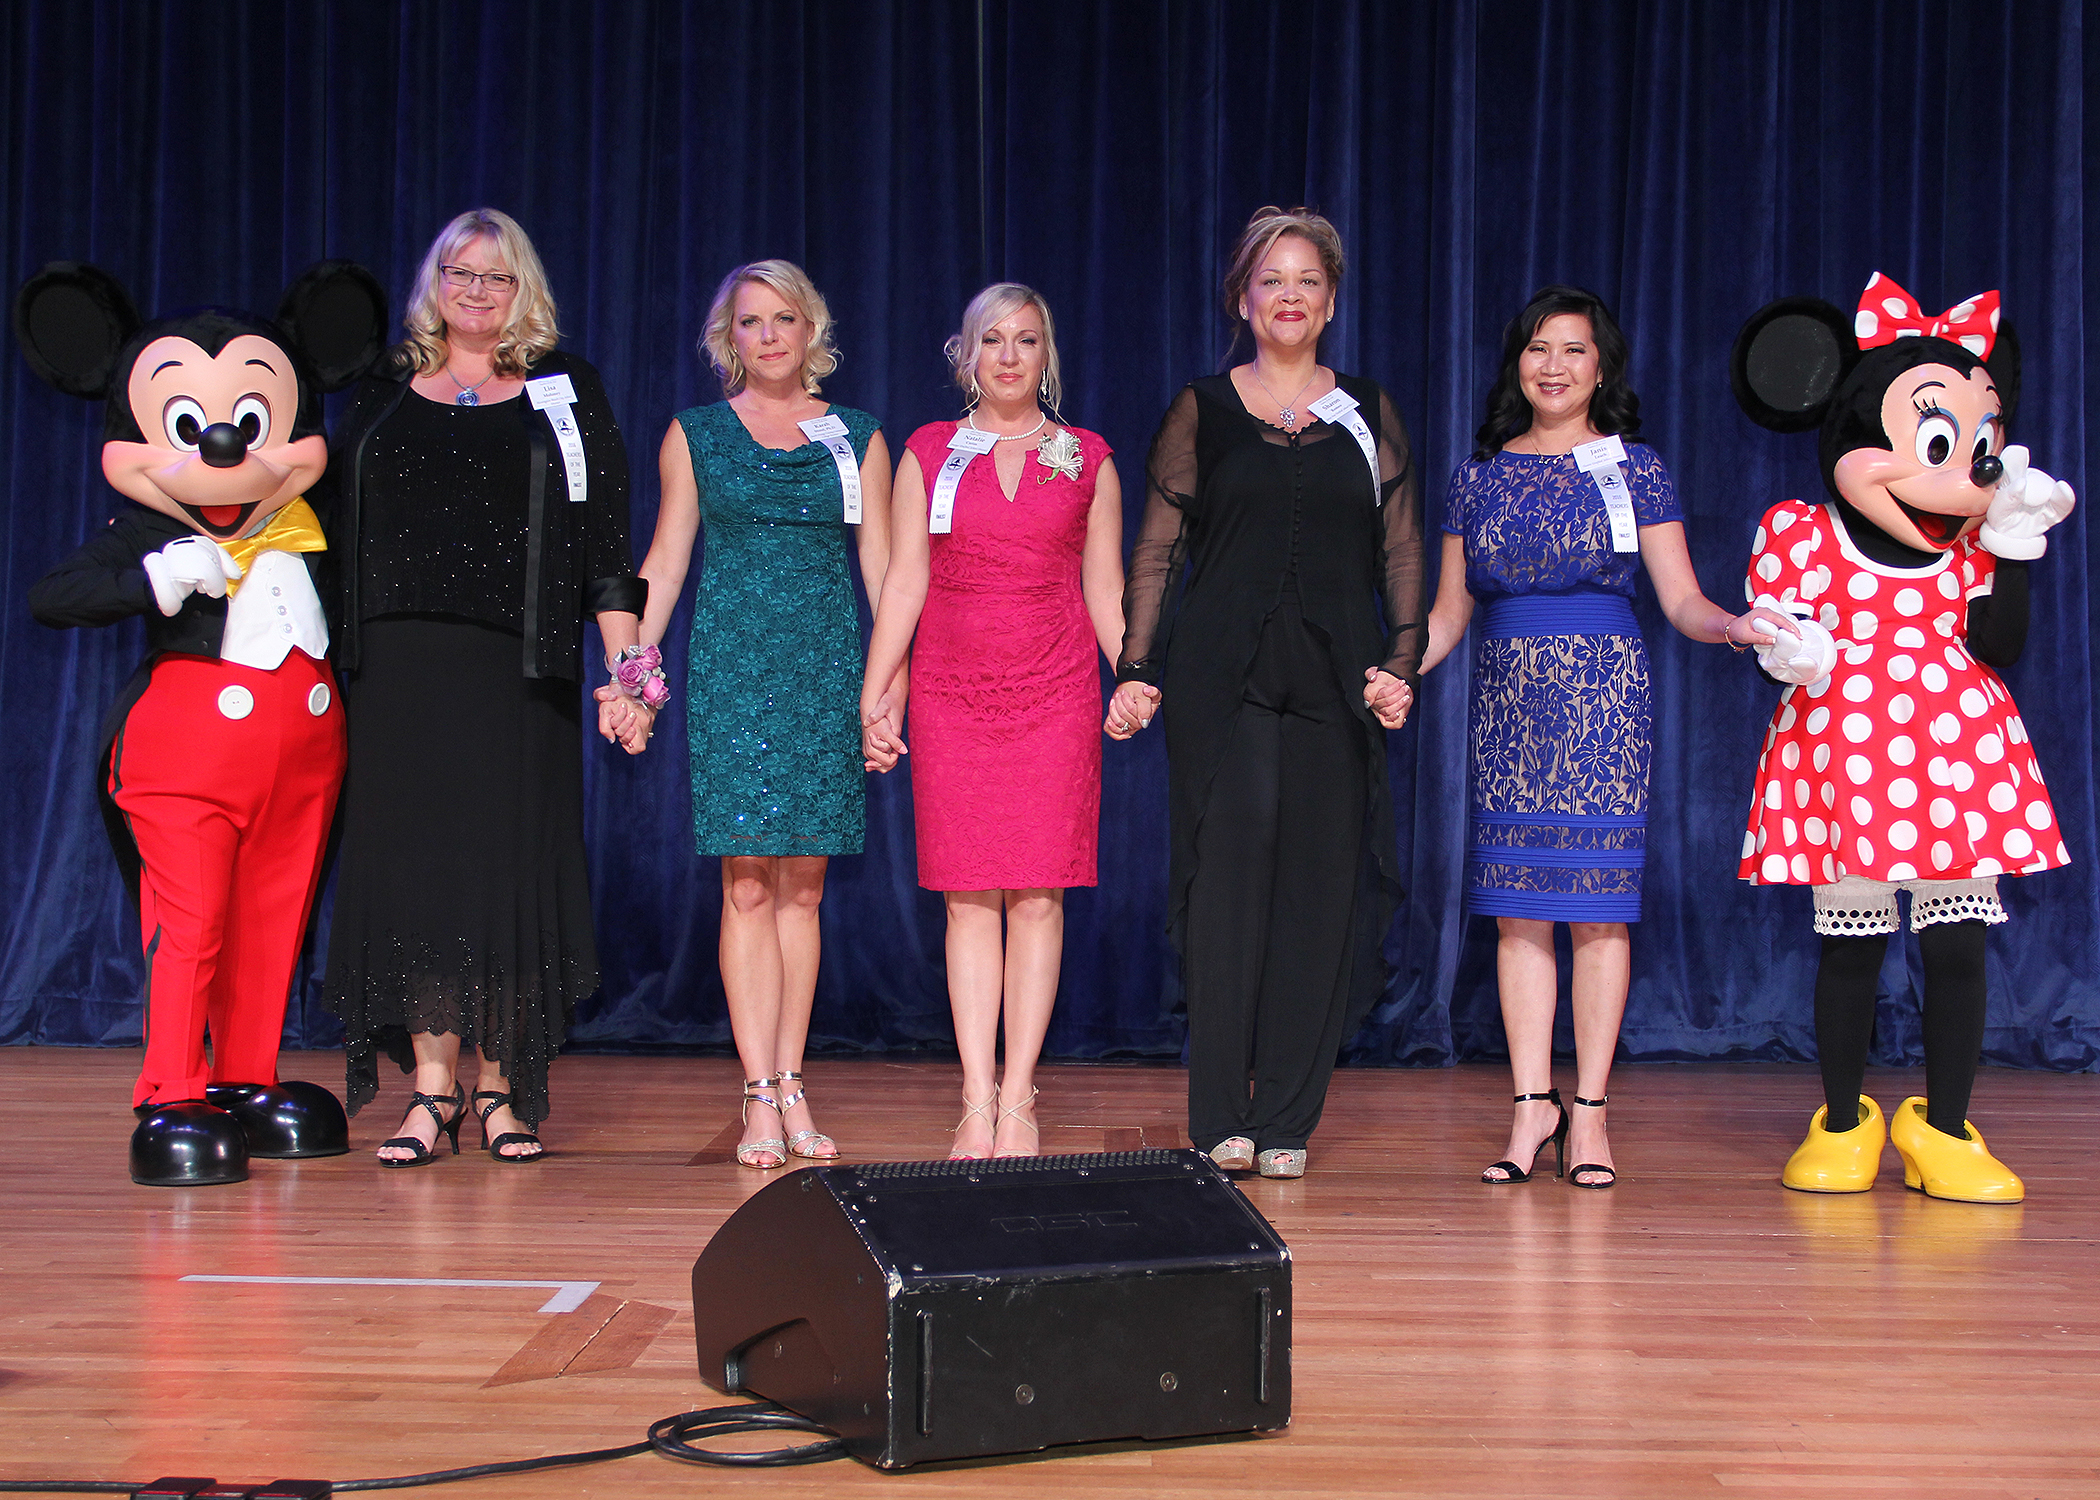 Teachers of the Year with Mickey and Minnie Mouse